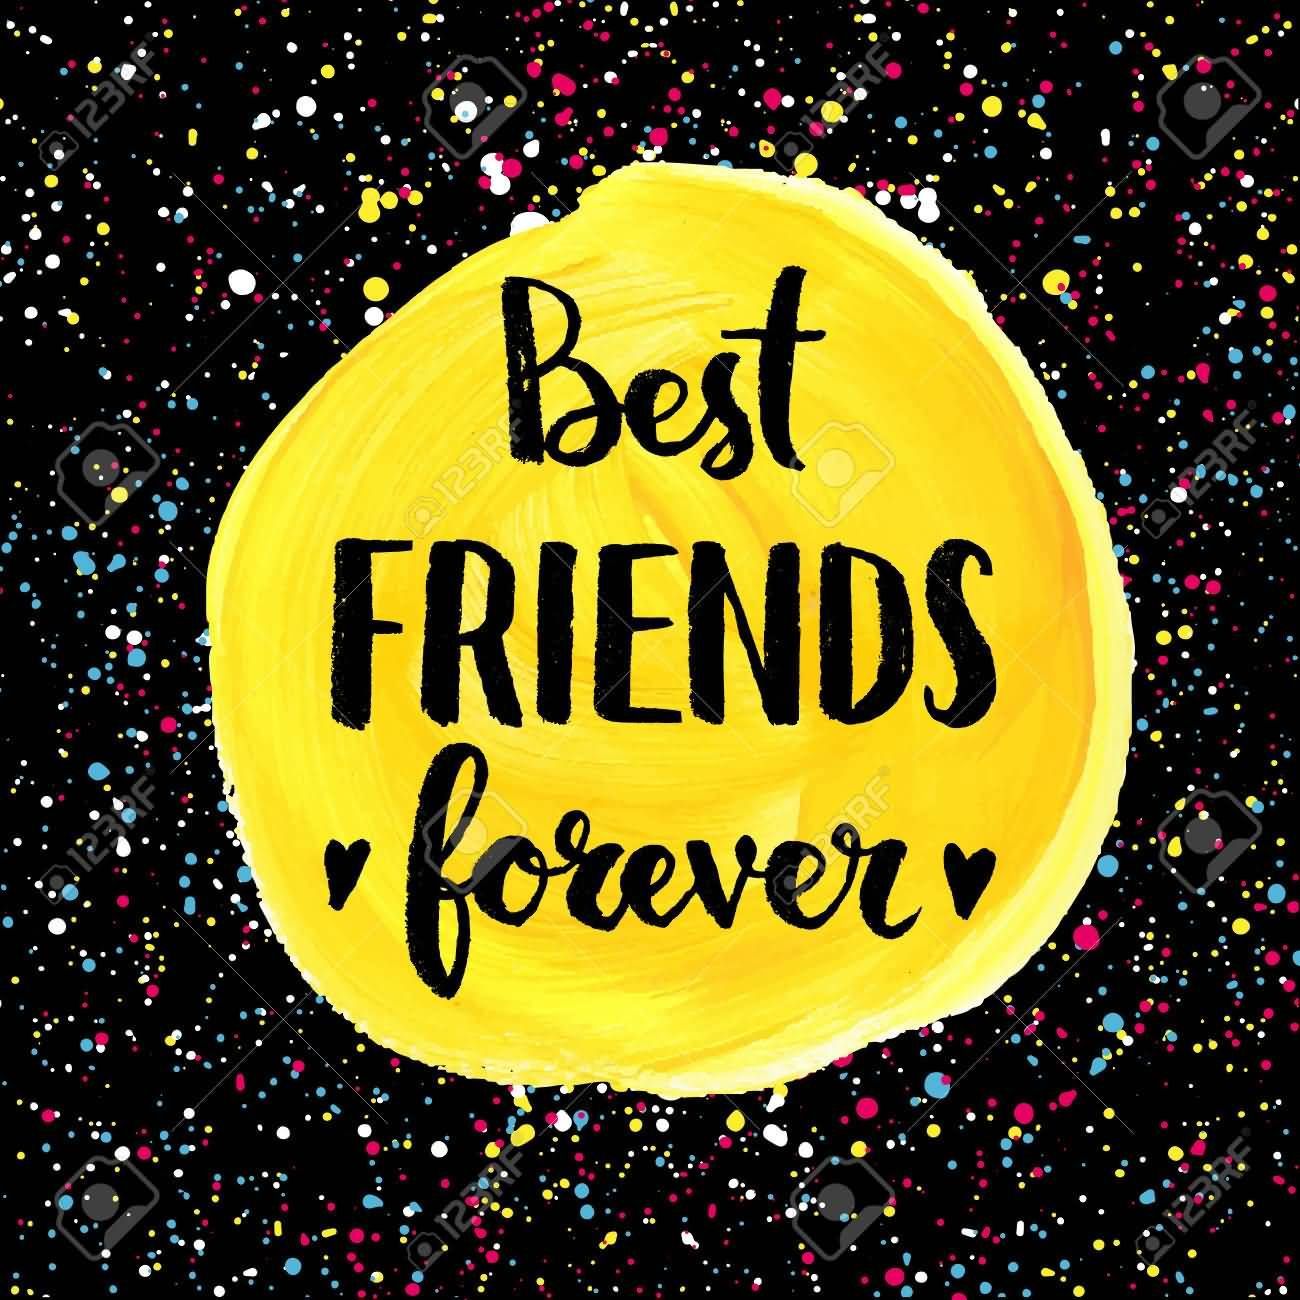 The Prettiest Soul. Best friends forever quotes, Friends forever picture, Best friend image